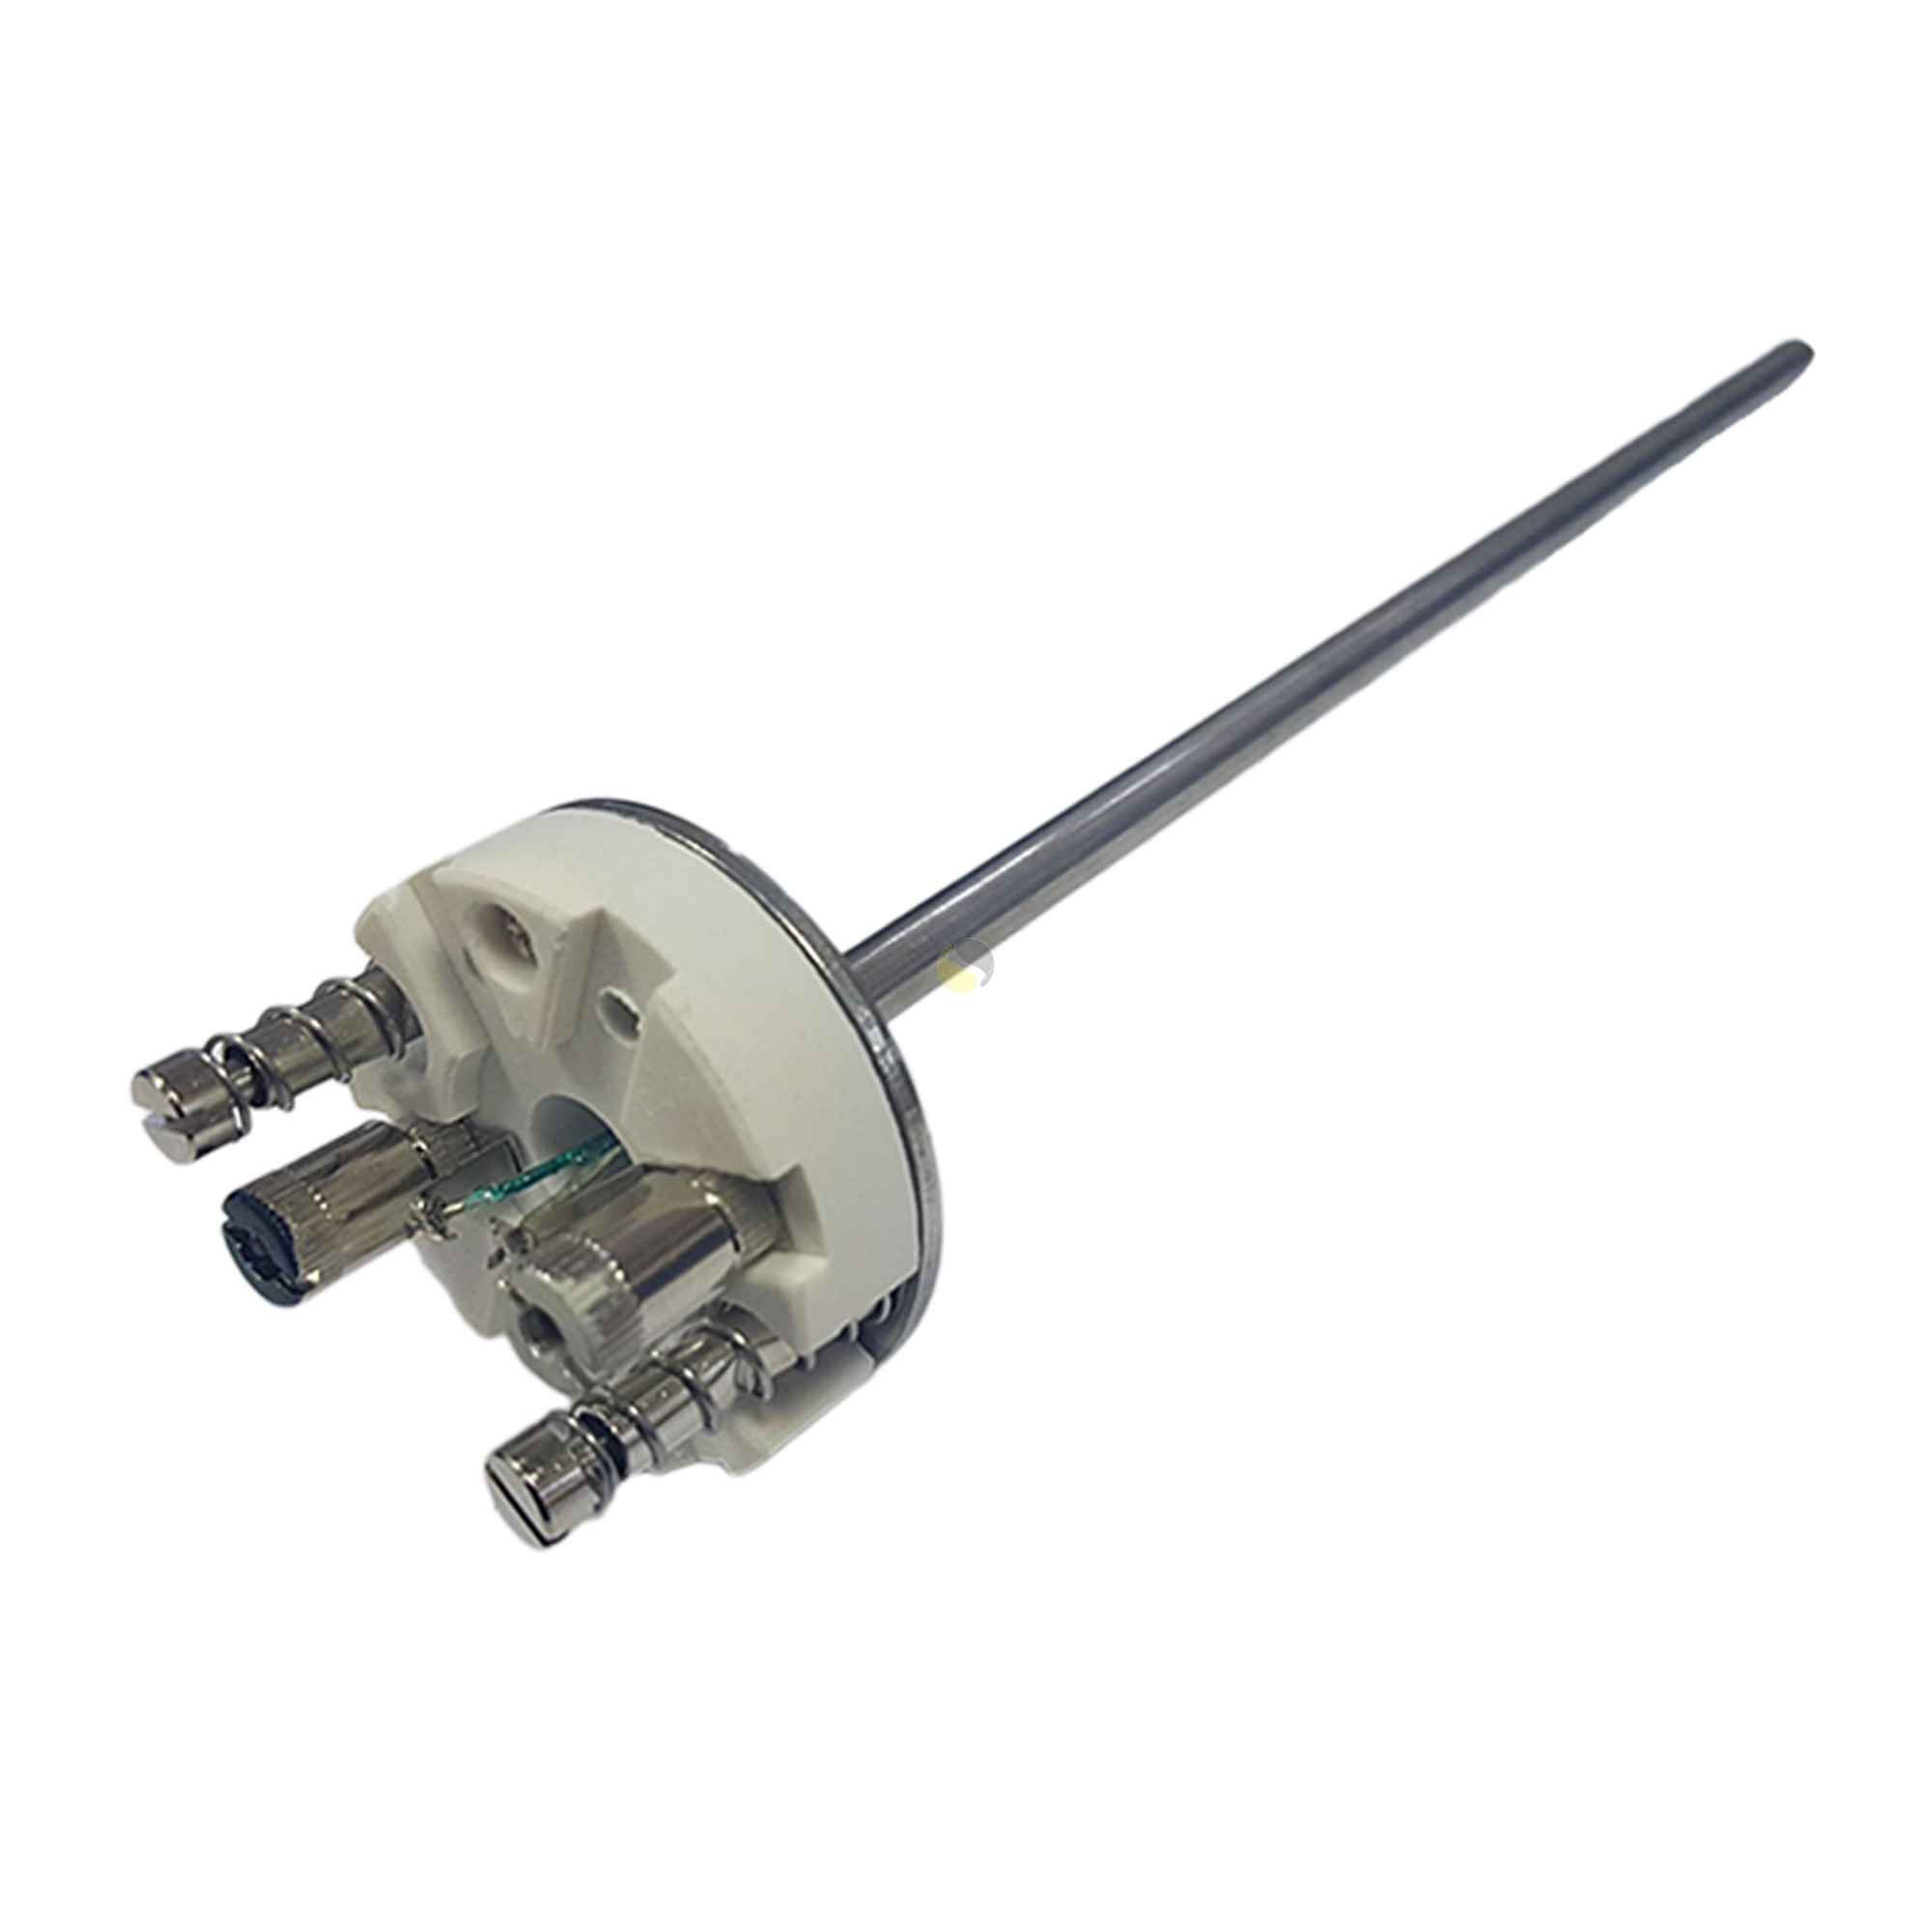 spring loaded temperature sensor with thermowell and inset sensor.